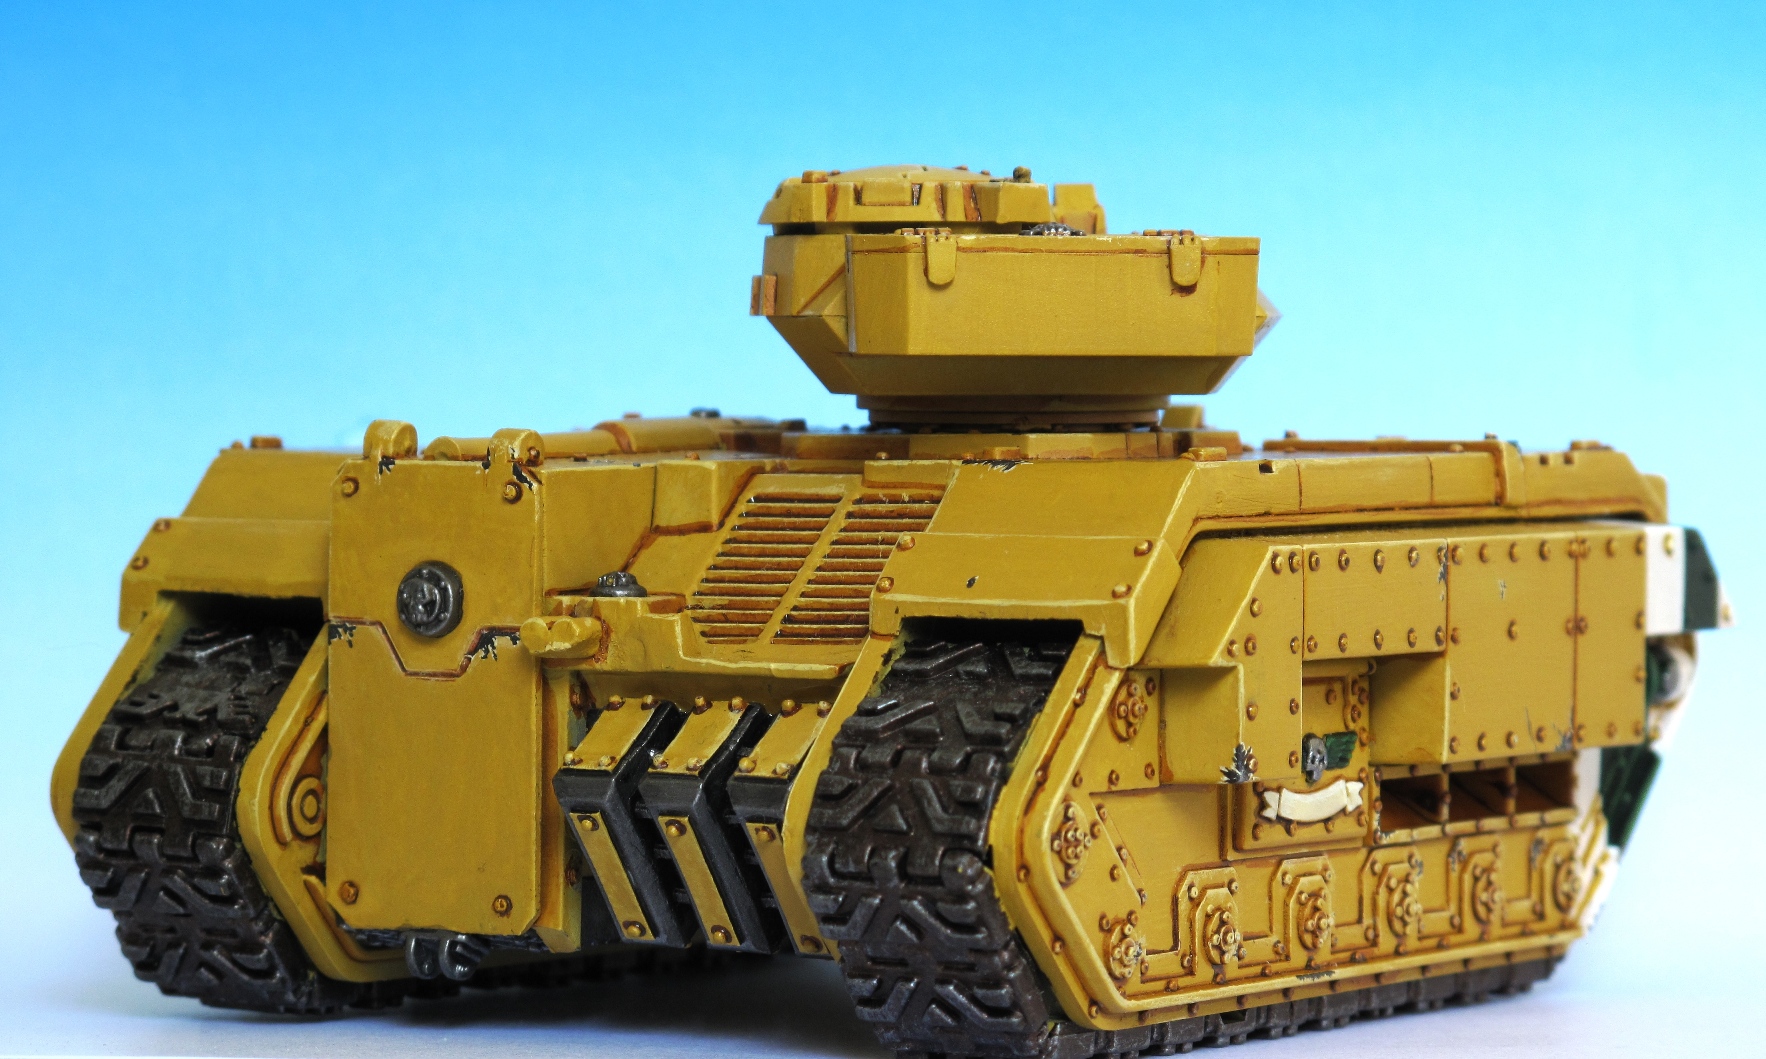 yellow painted toy tank with metal handles and treads